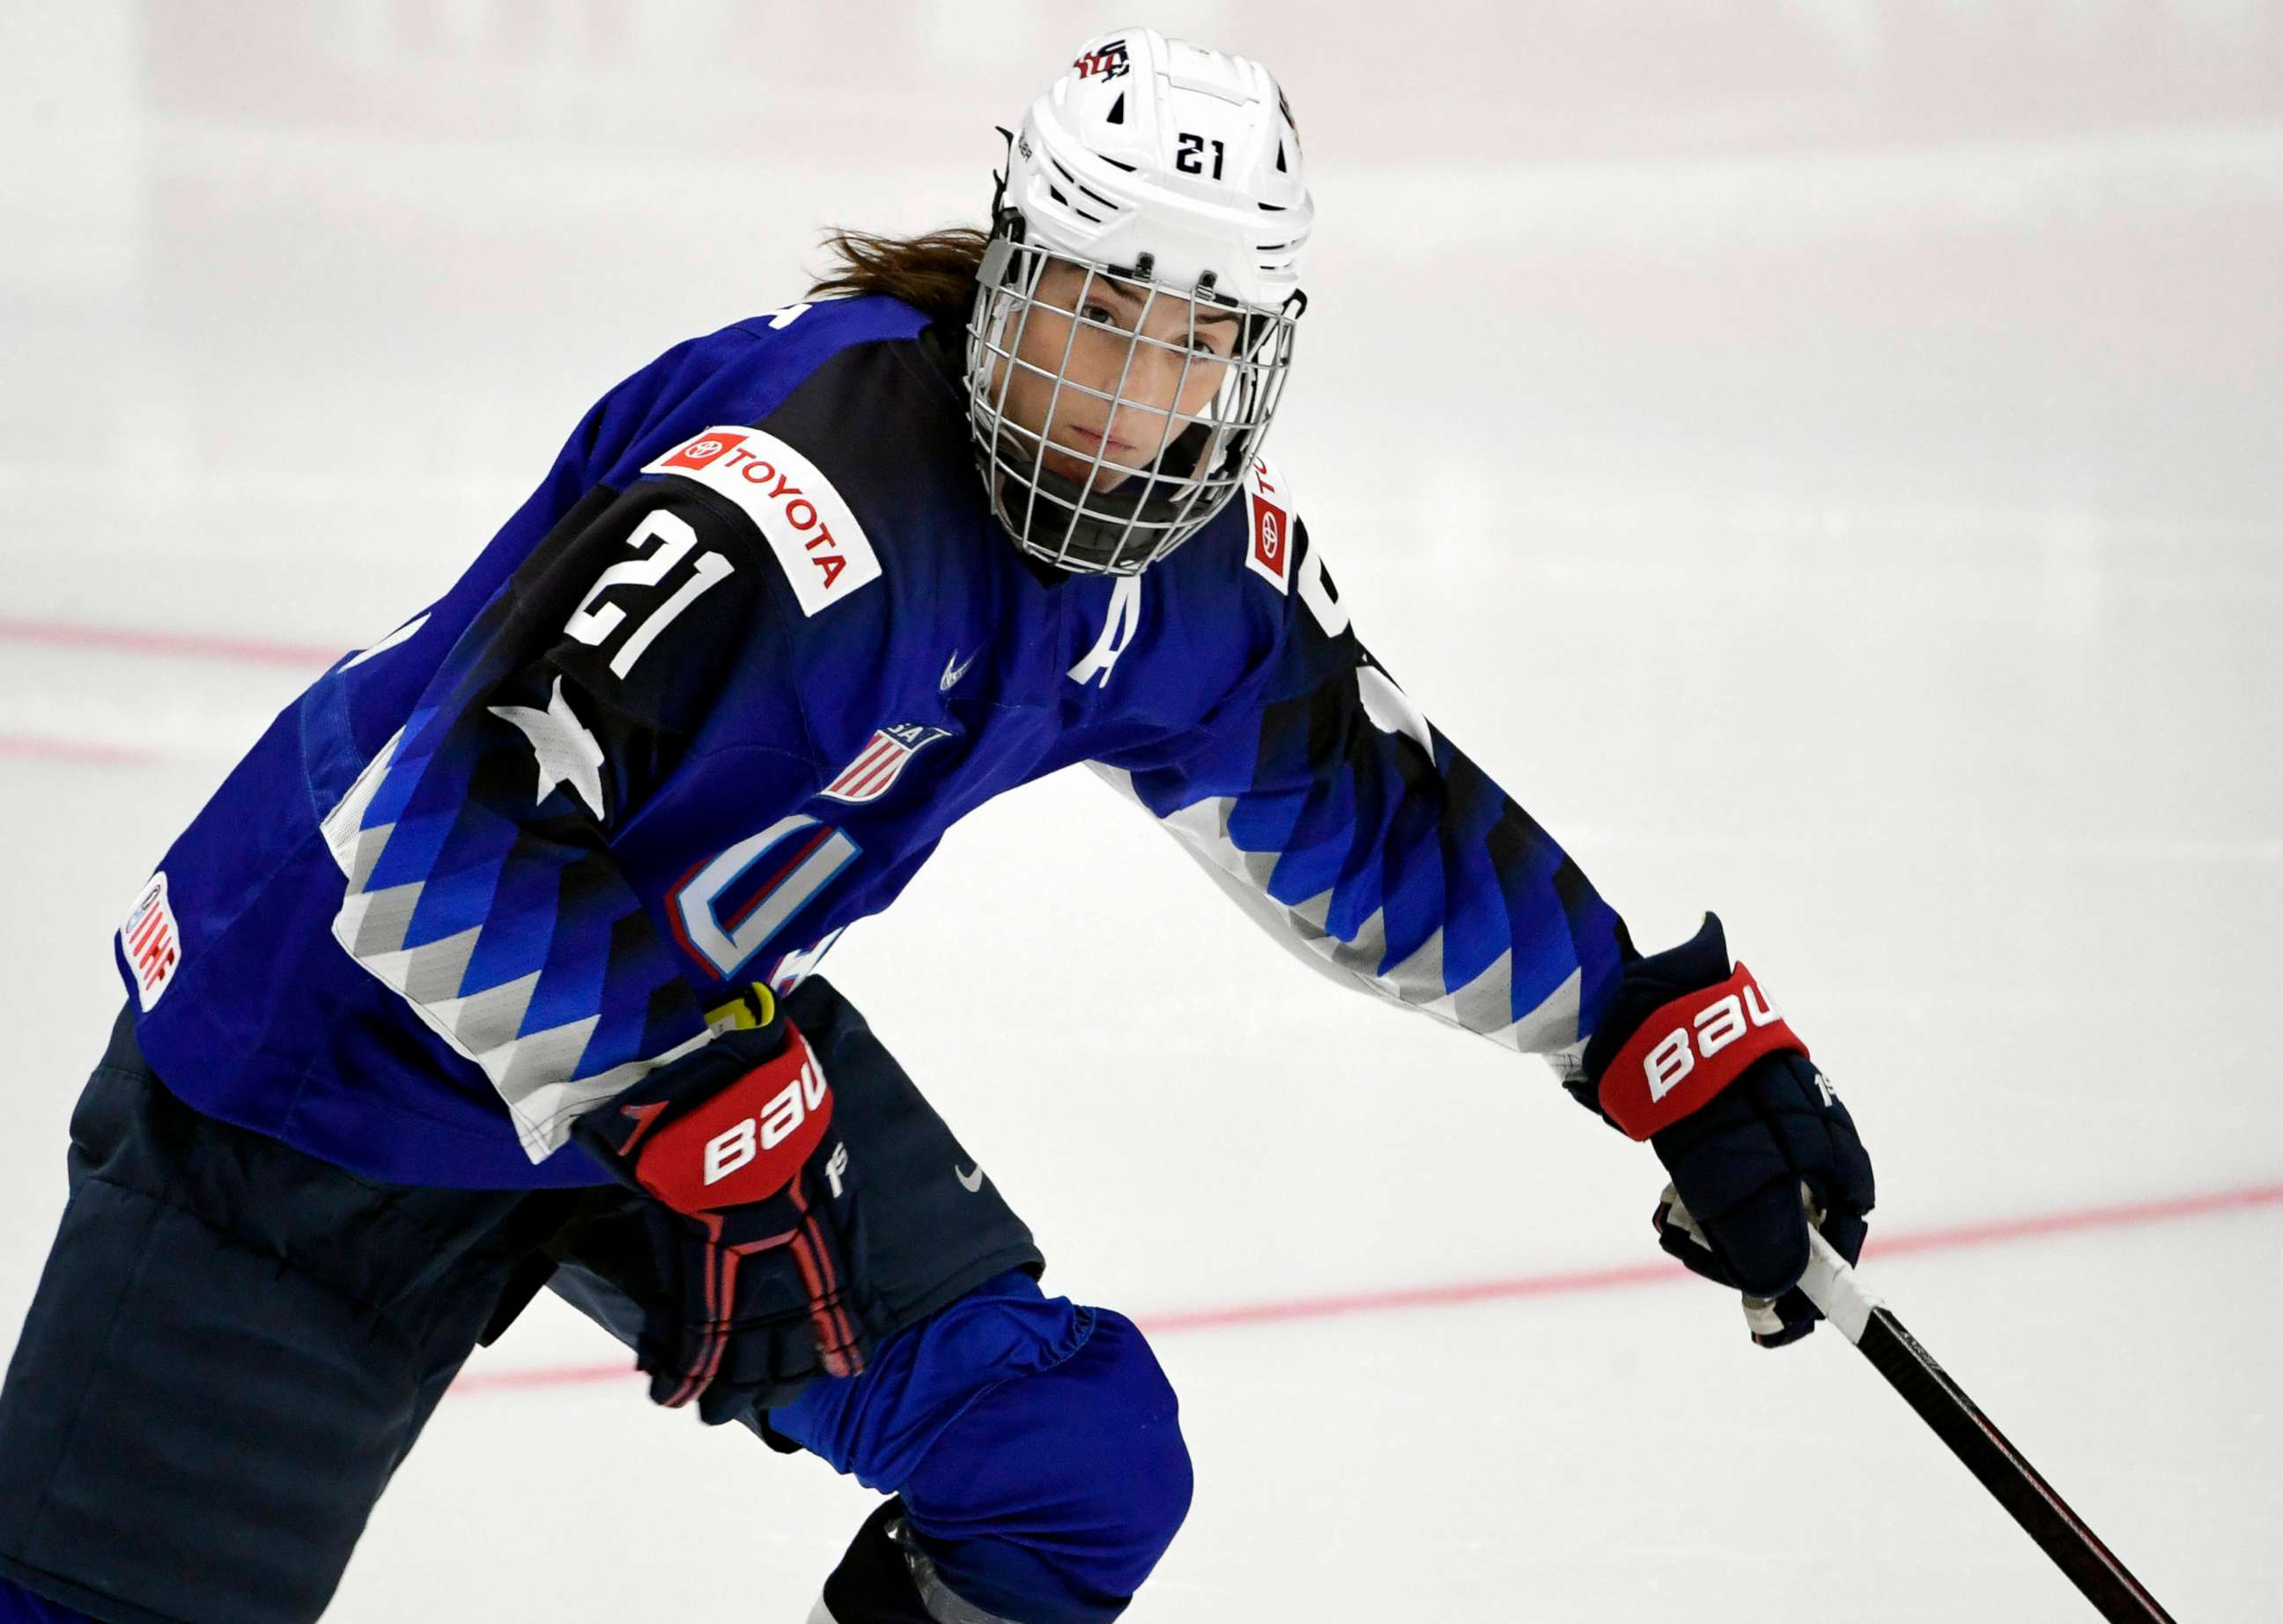 PHOTO: Hilary Knight of USA in action during the IIHF Women's Ice Hockey World Championships quarterfinal match USA vs Japan, in Espoo, Finland, April 11, 2019.